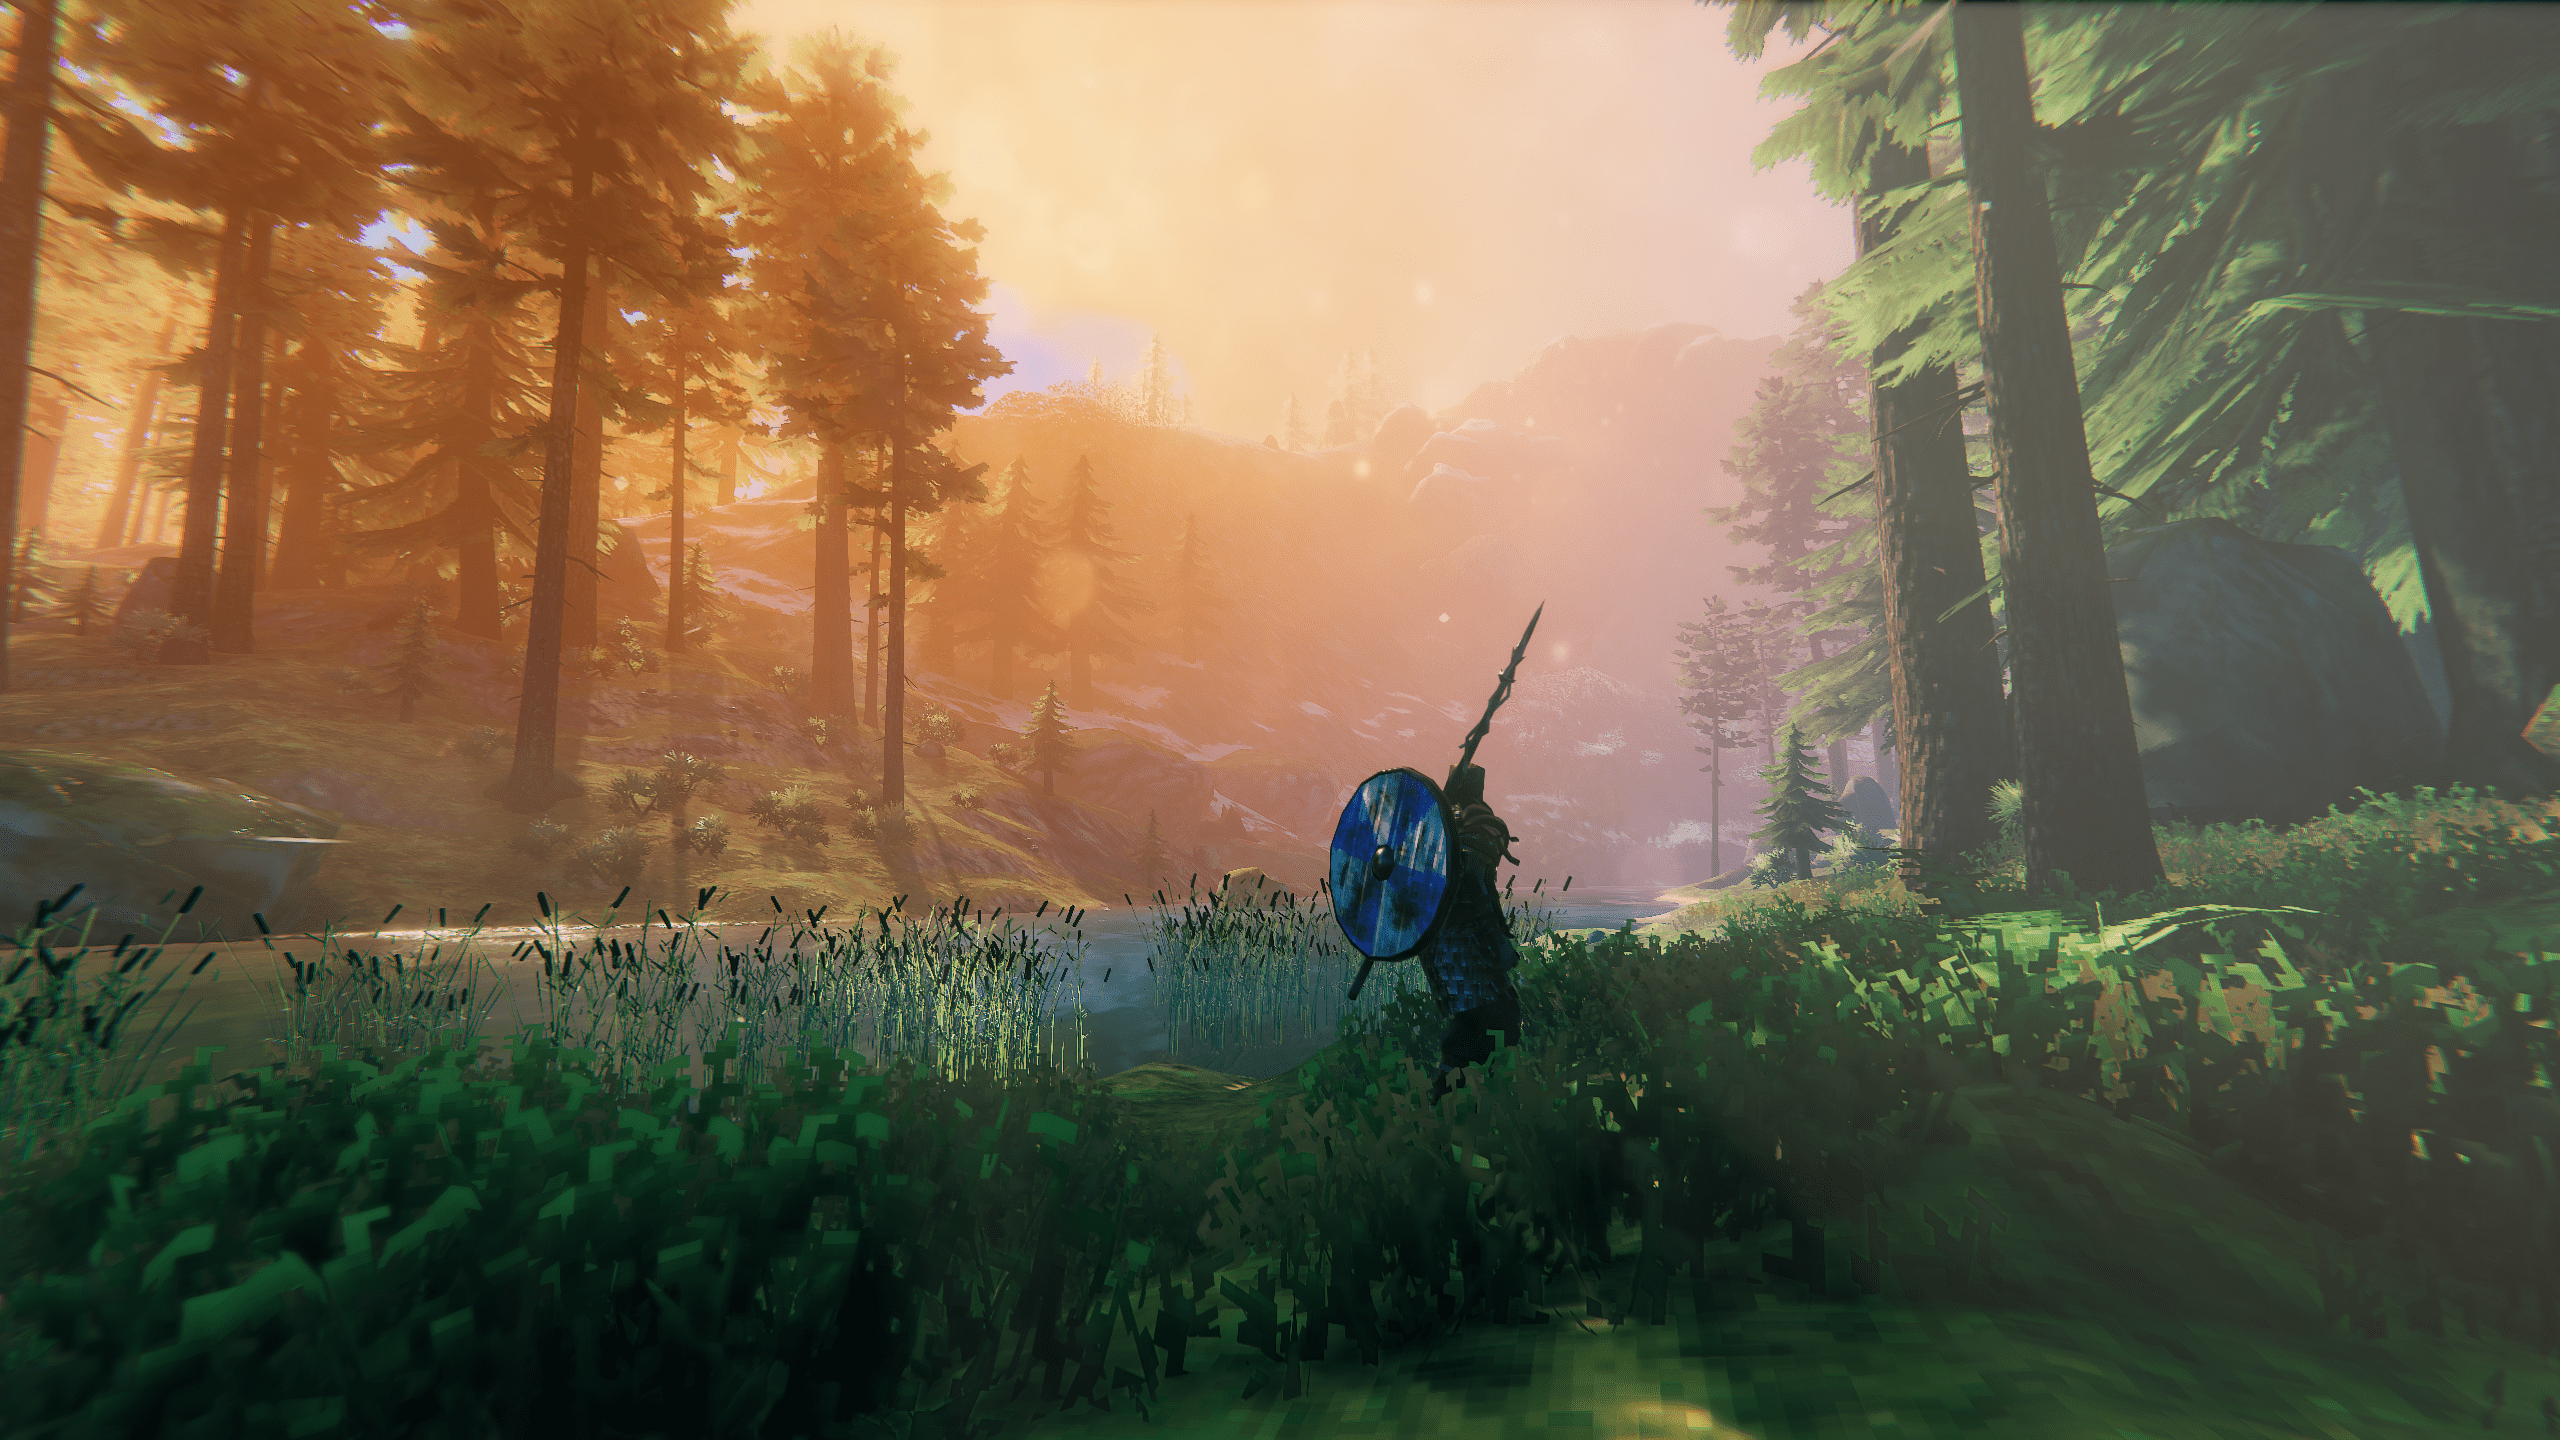 A game environment with trees and a warrior